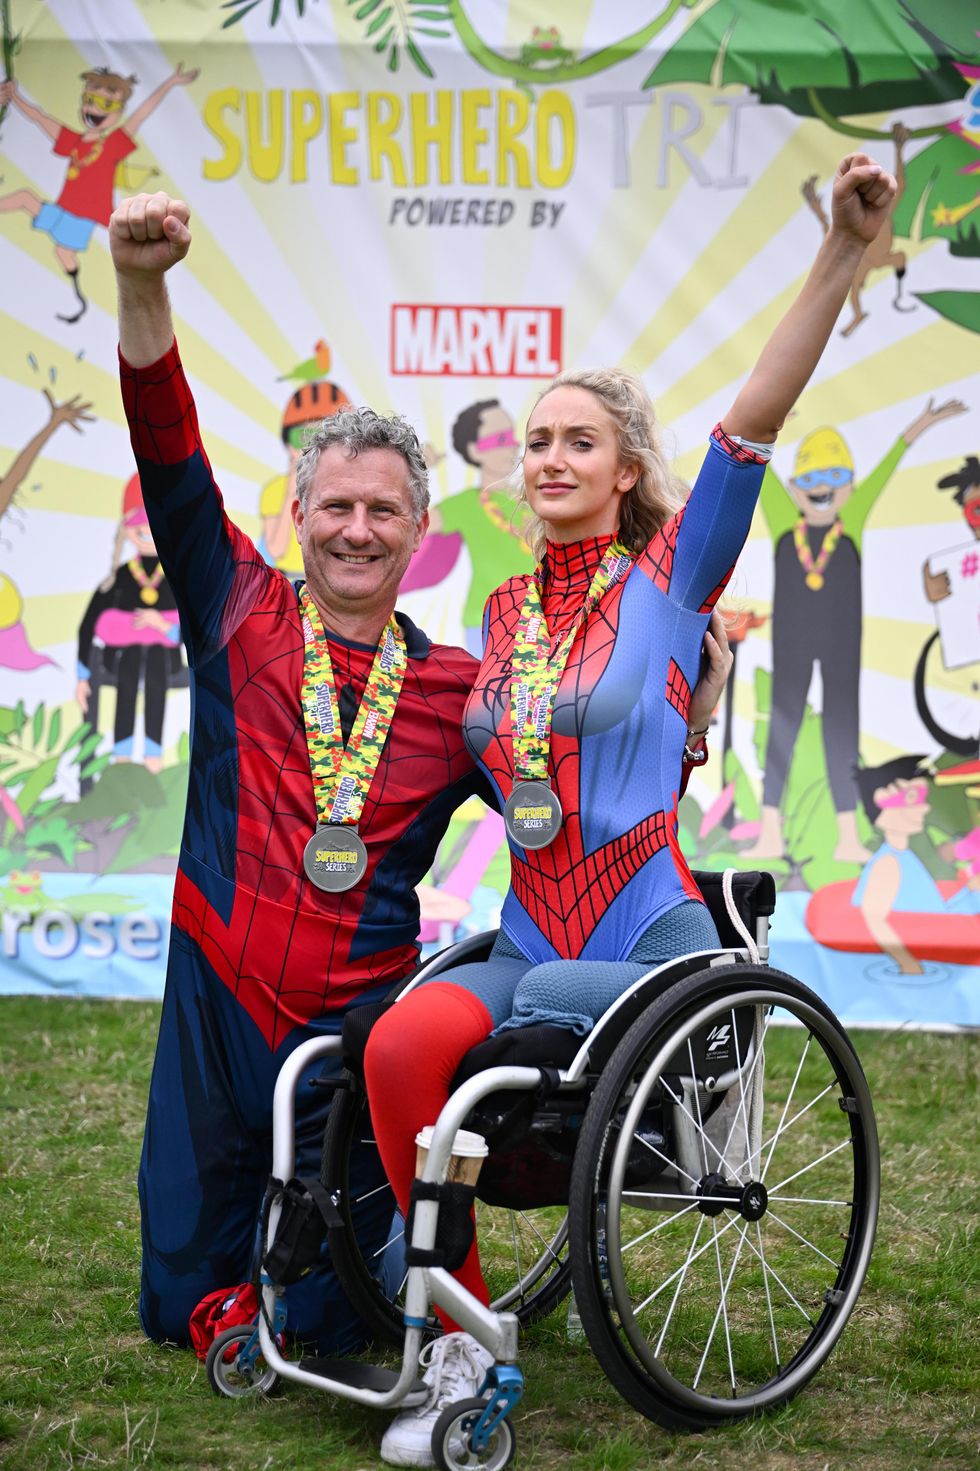 Adam Hills: Superhero sports day for those with disabilities means ‘everything’